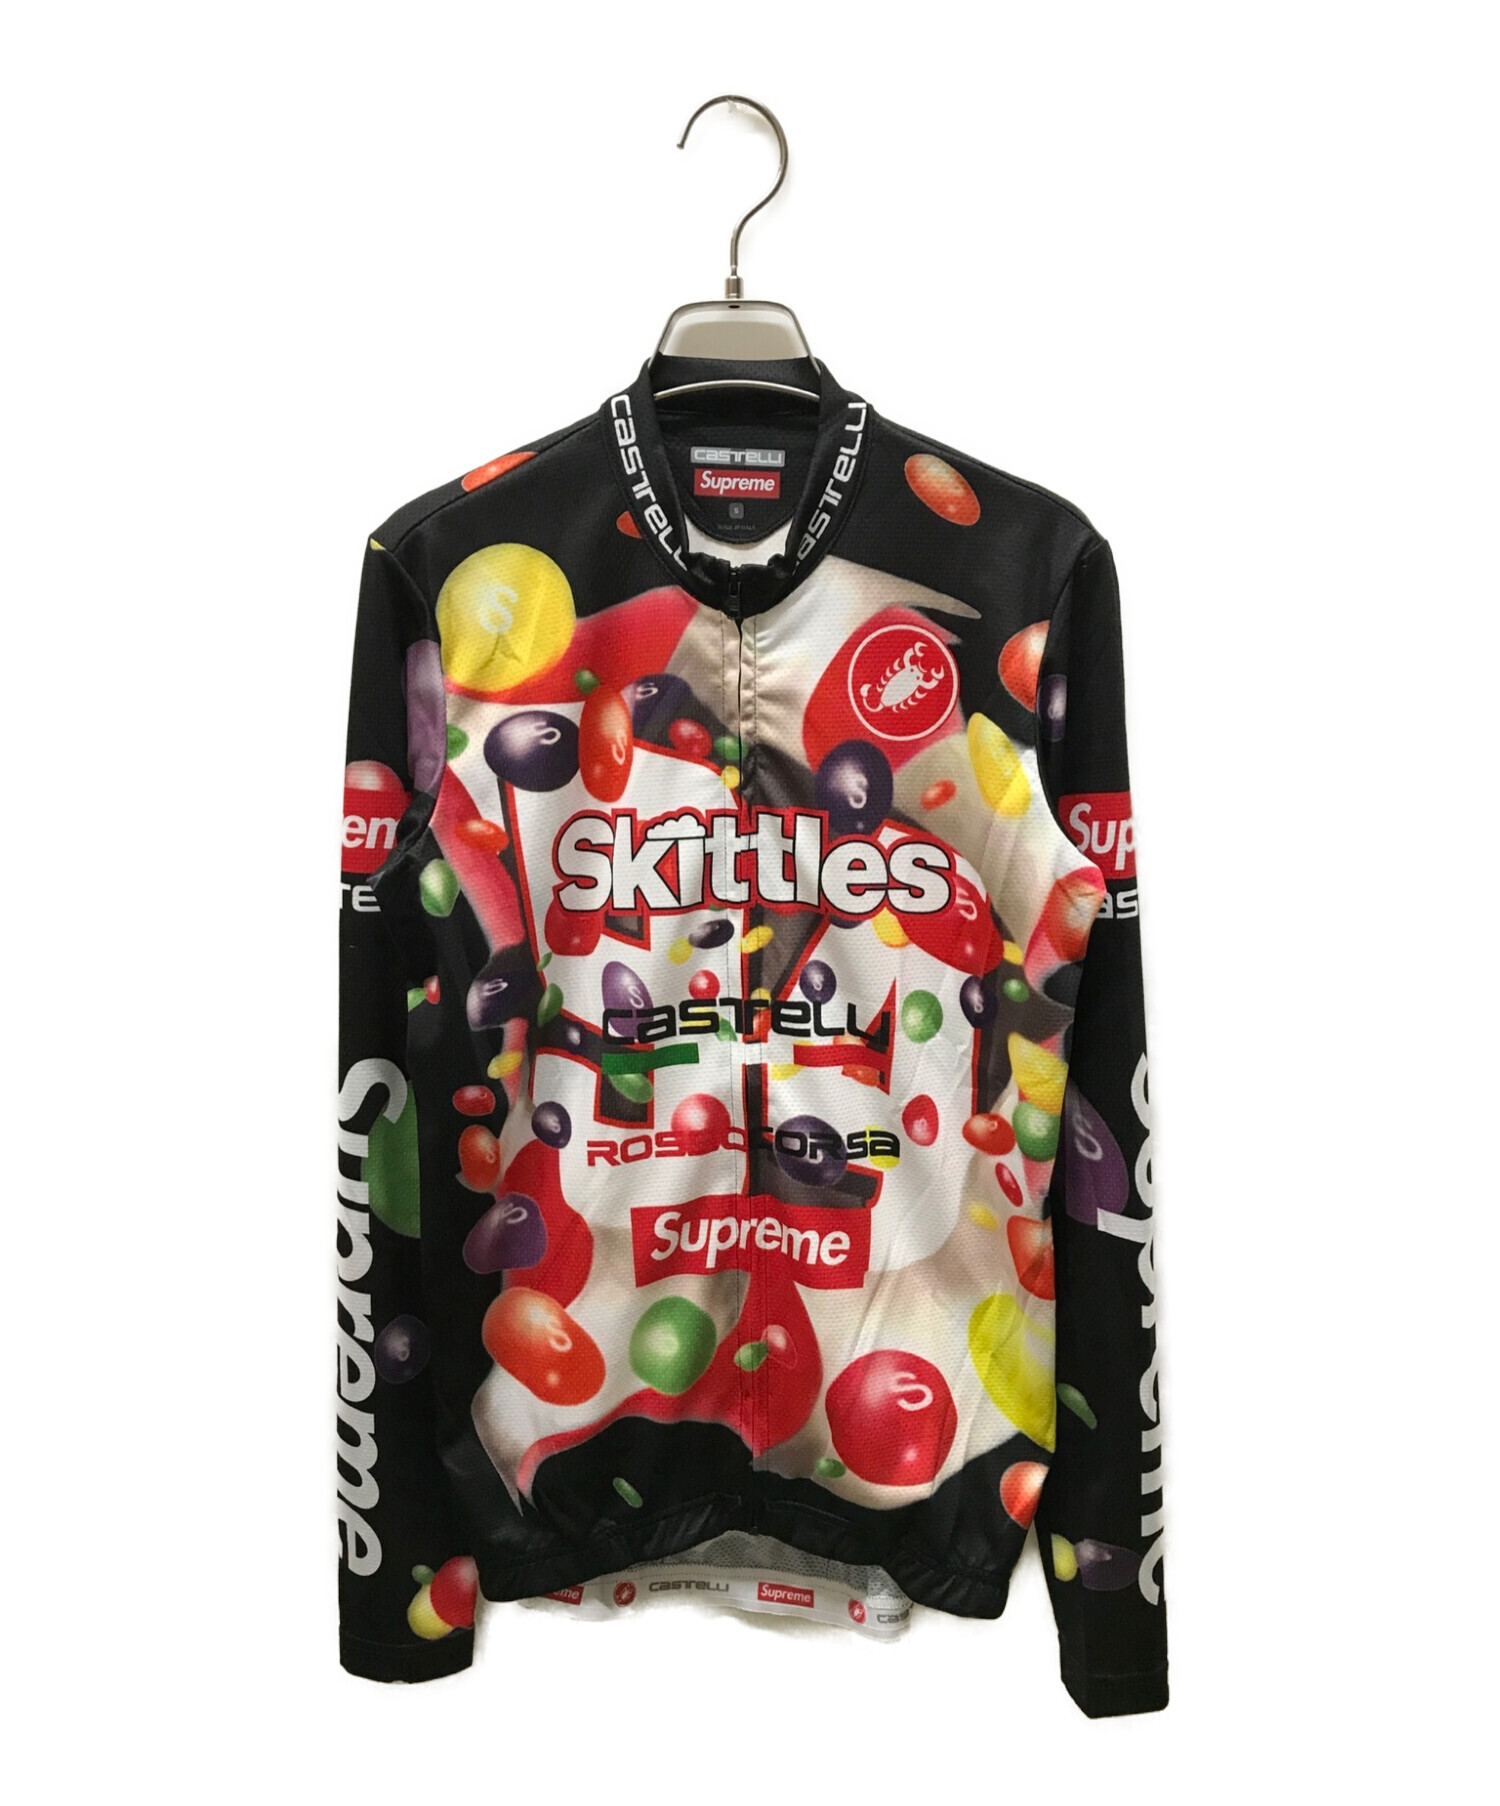 Supreme Castelli Cycling Jersey Lトップス